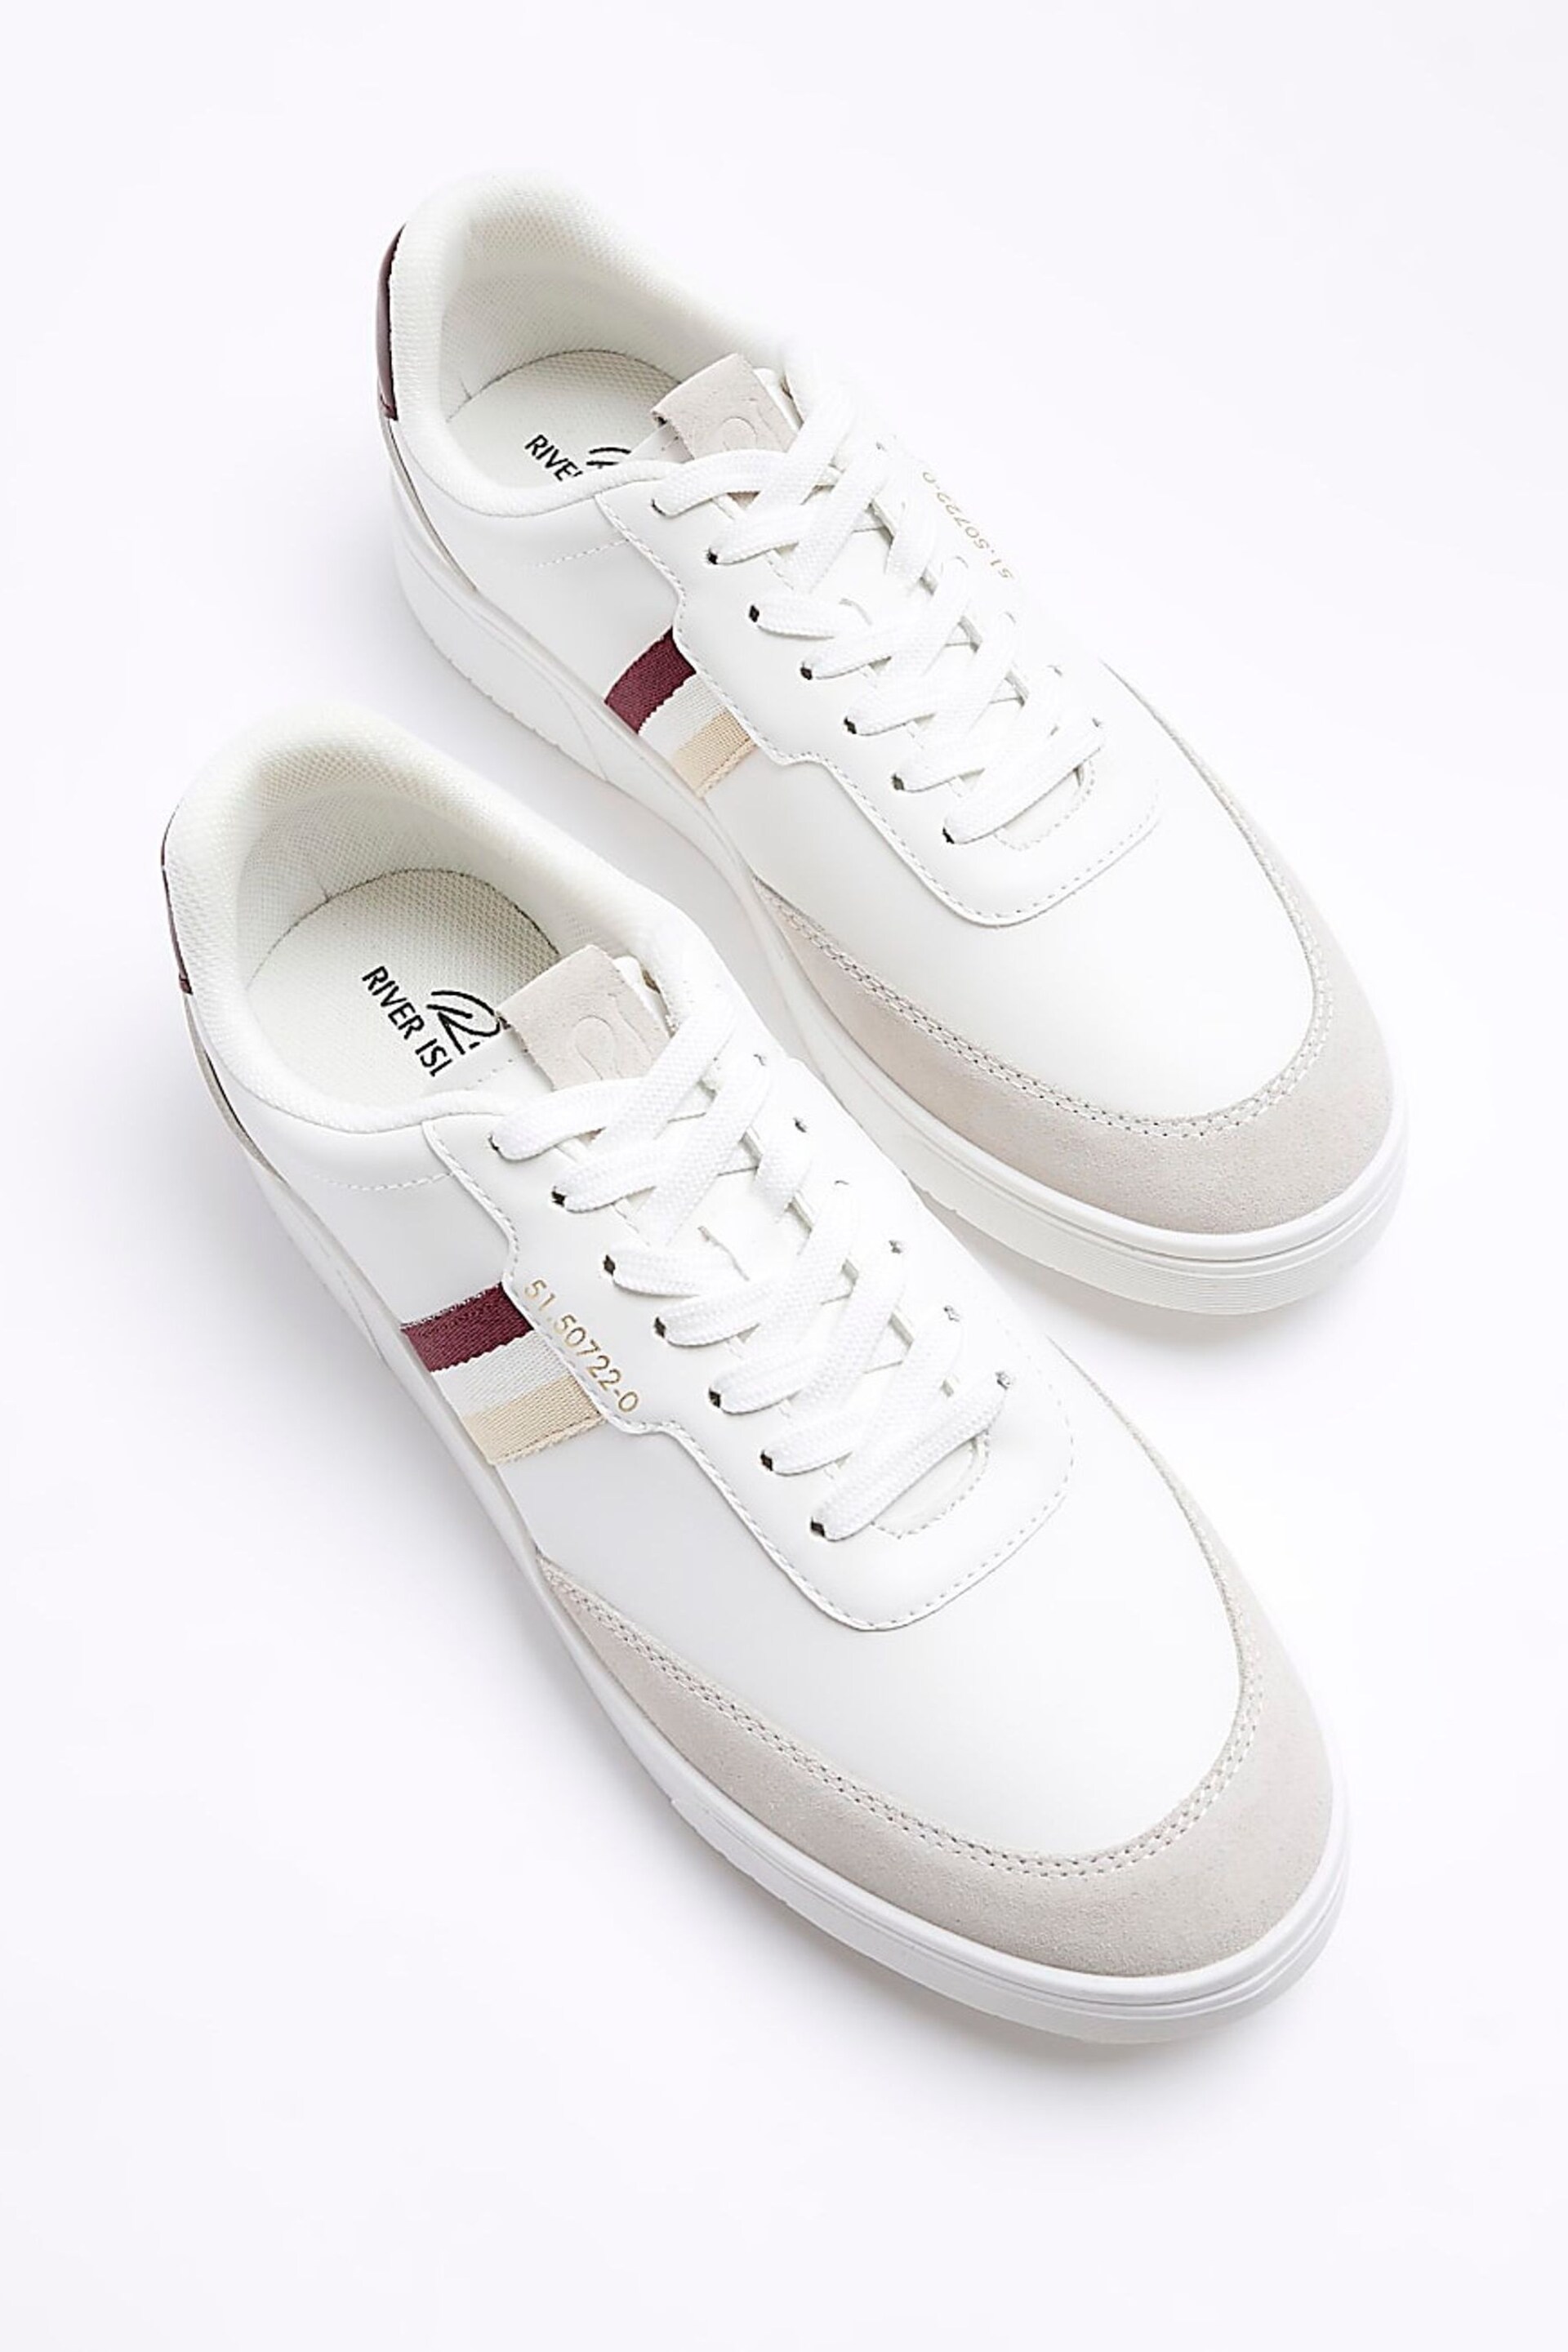 River Island White Leather Webbing Skater Trainers - Image 4 of 5